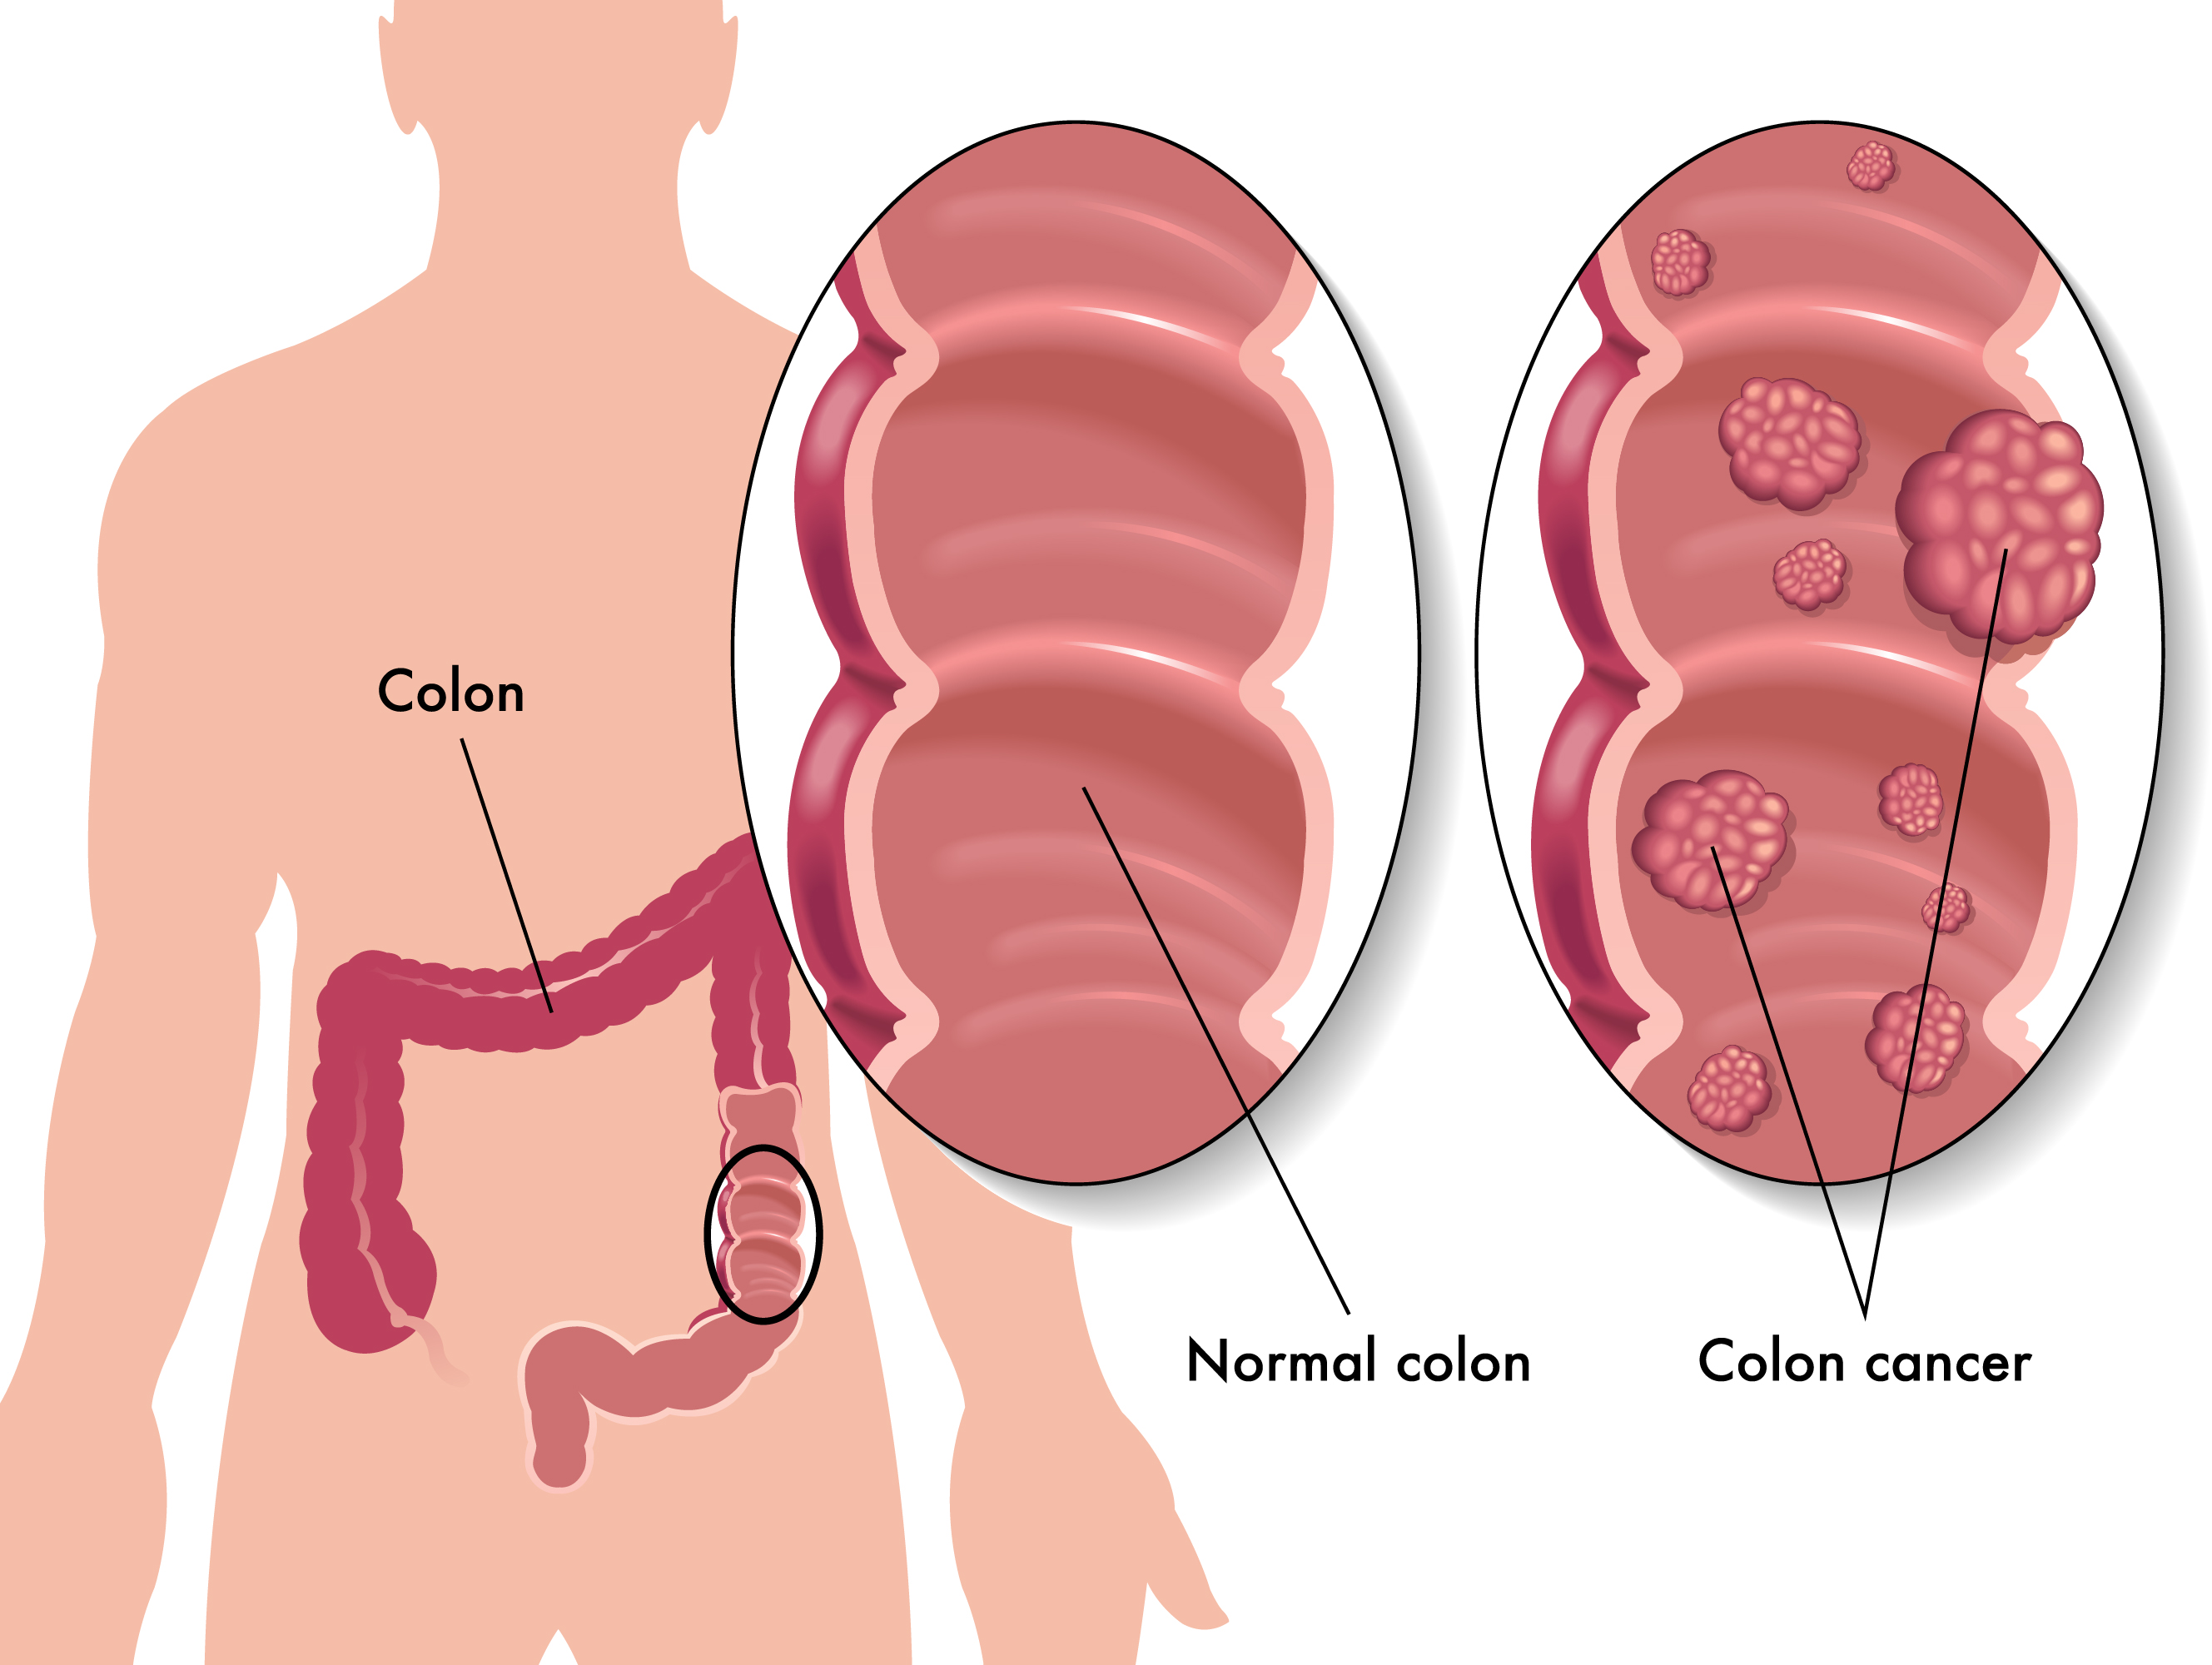 Diagnosis of colorectal cancer